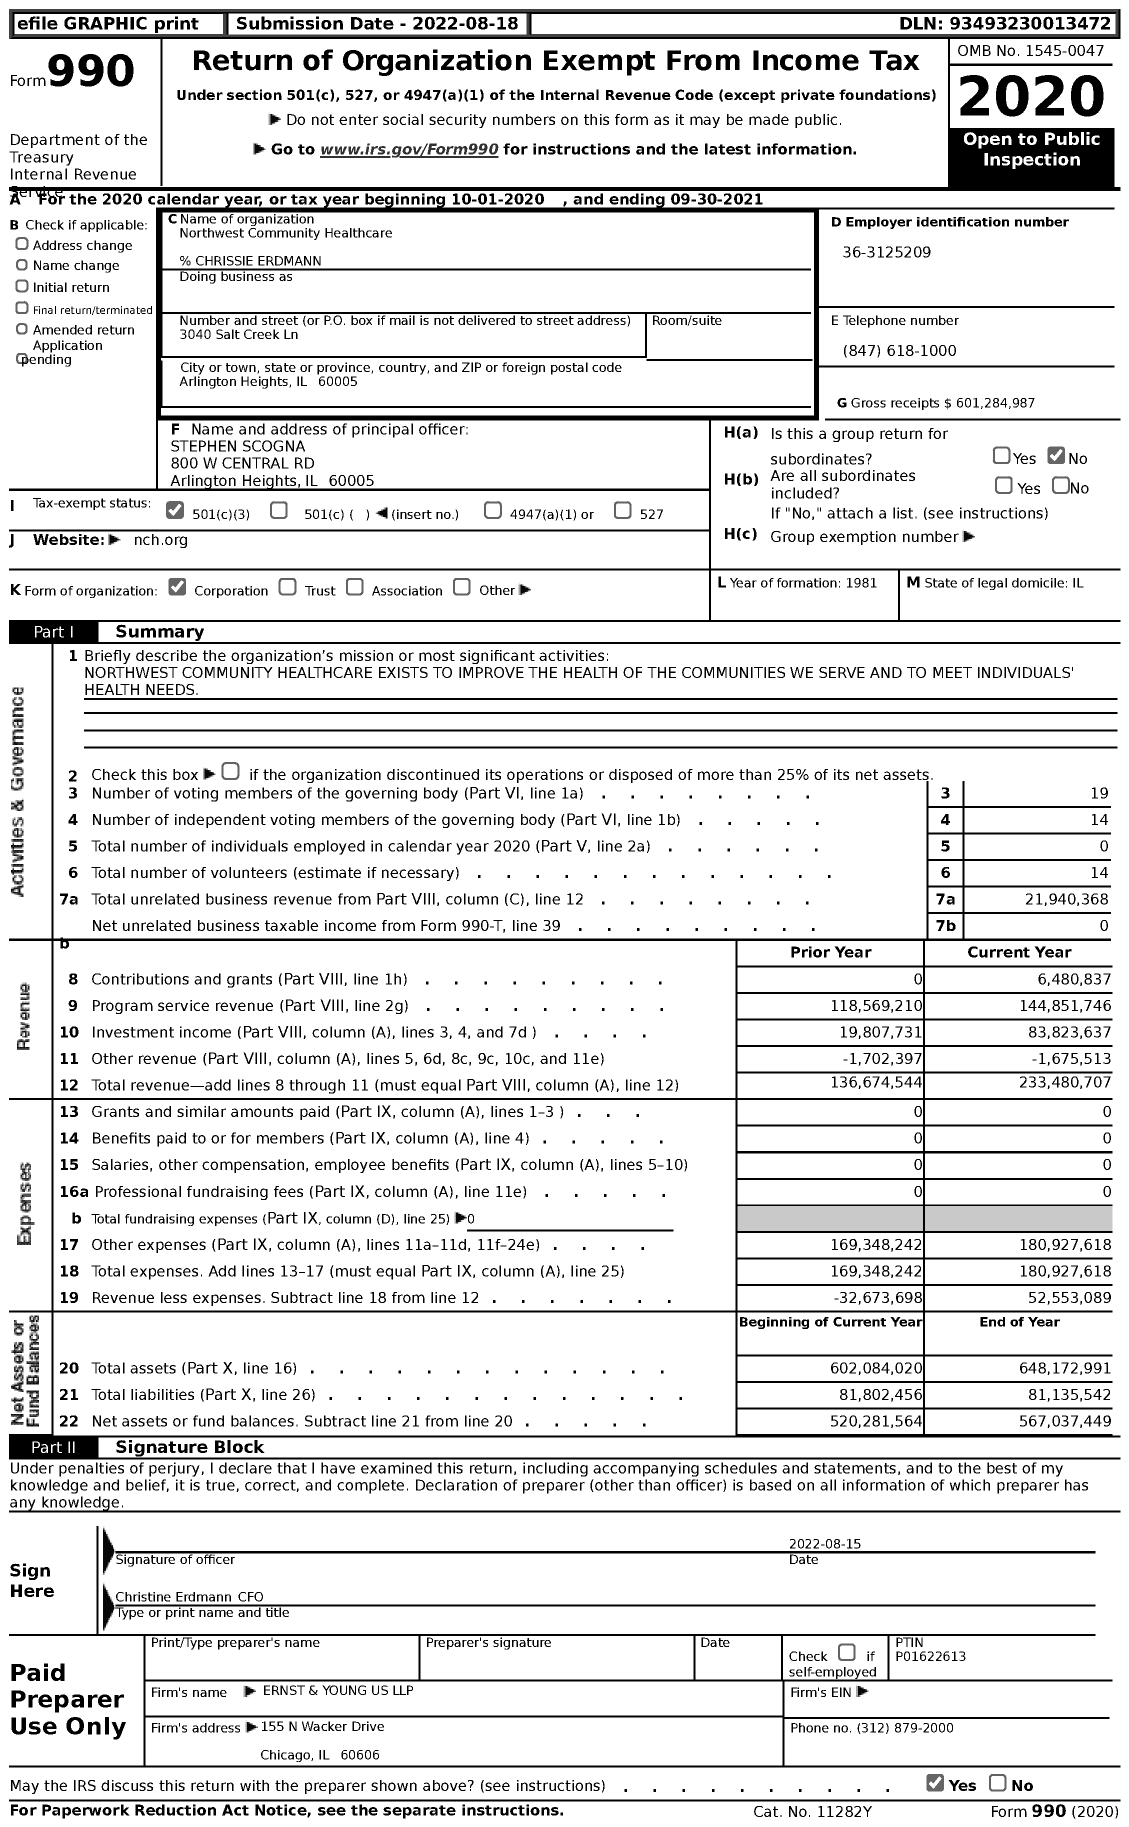 Image of first page of 2020 Form 990 for Northwest Community Healthcare (NCH)